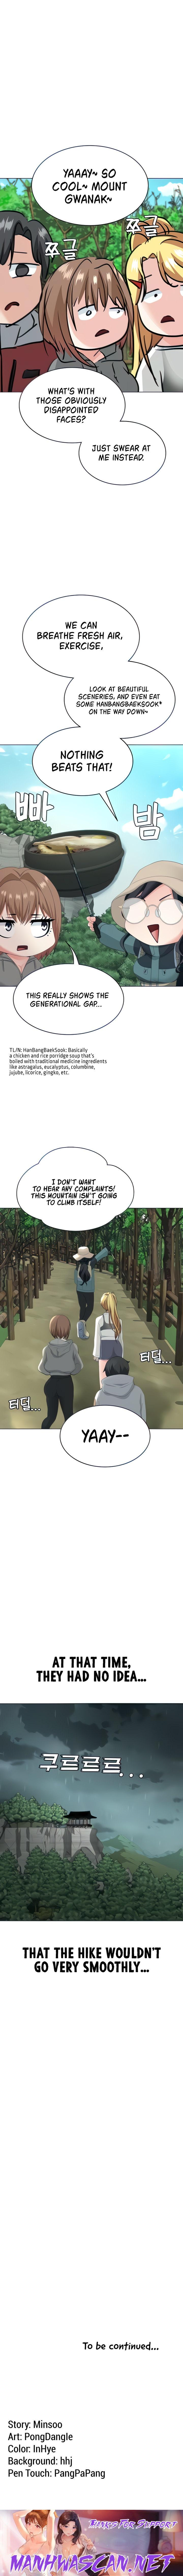 Seoul Kids These Days - Chapter 17 Page 22